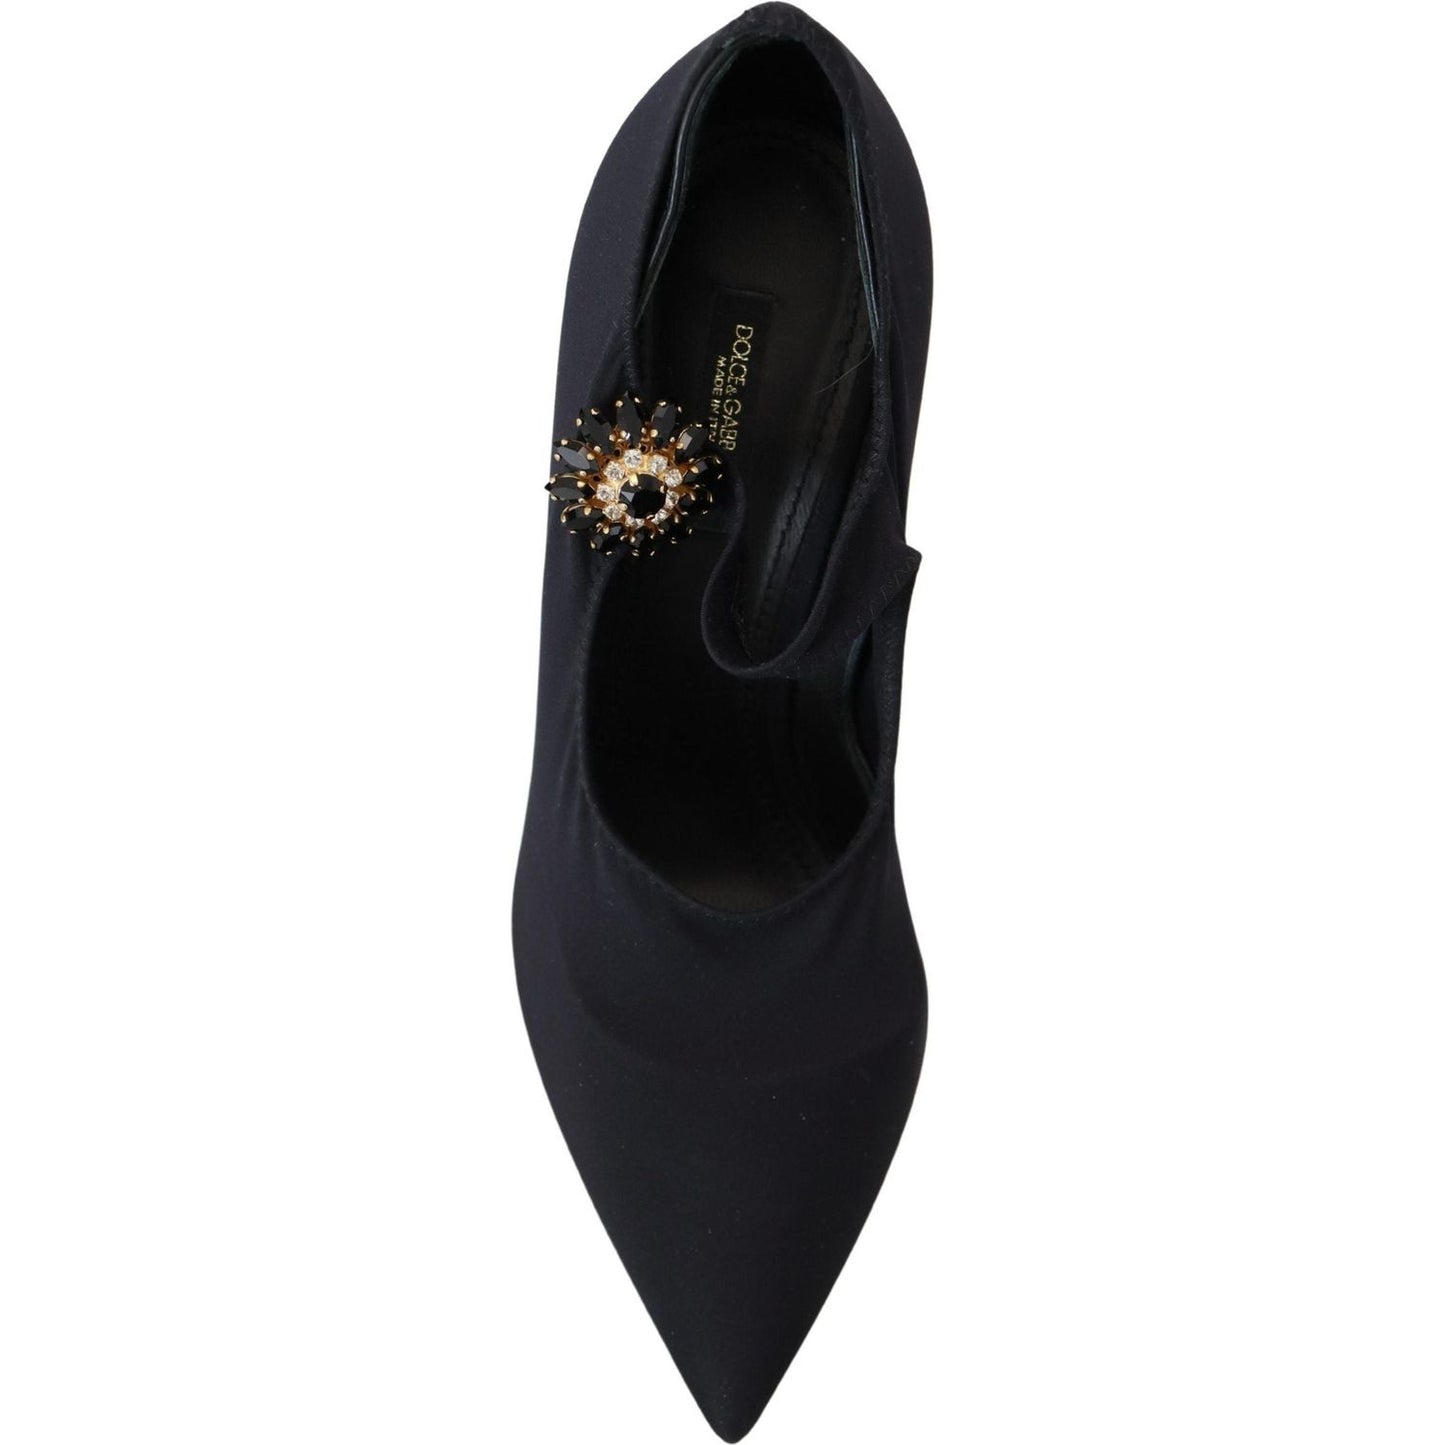 Dolce & Gabbana Chic Black Mary Jane Sock Pumps with Crystals black-socks-stretch-crystal-pumps-shoes